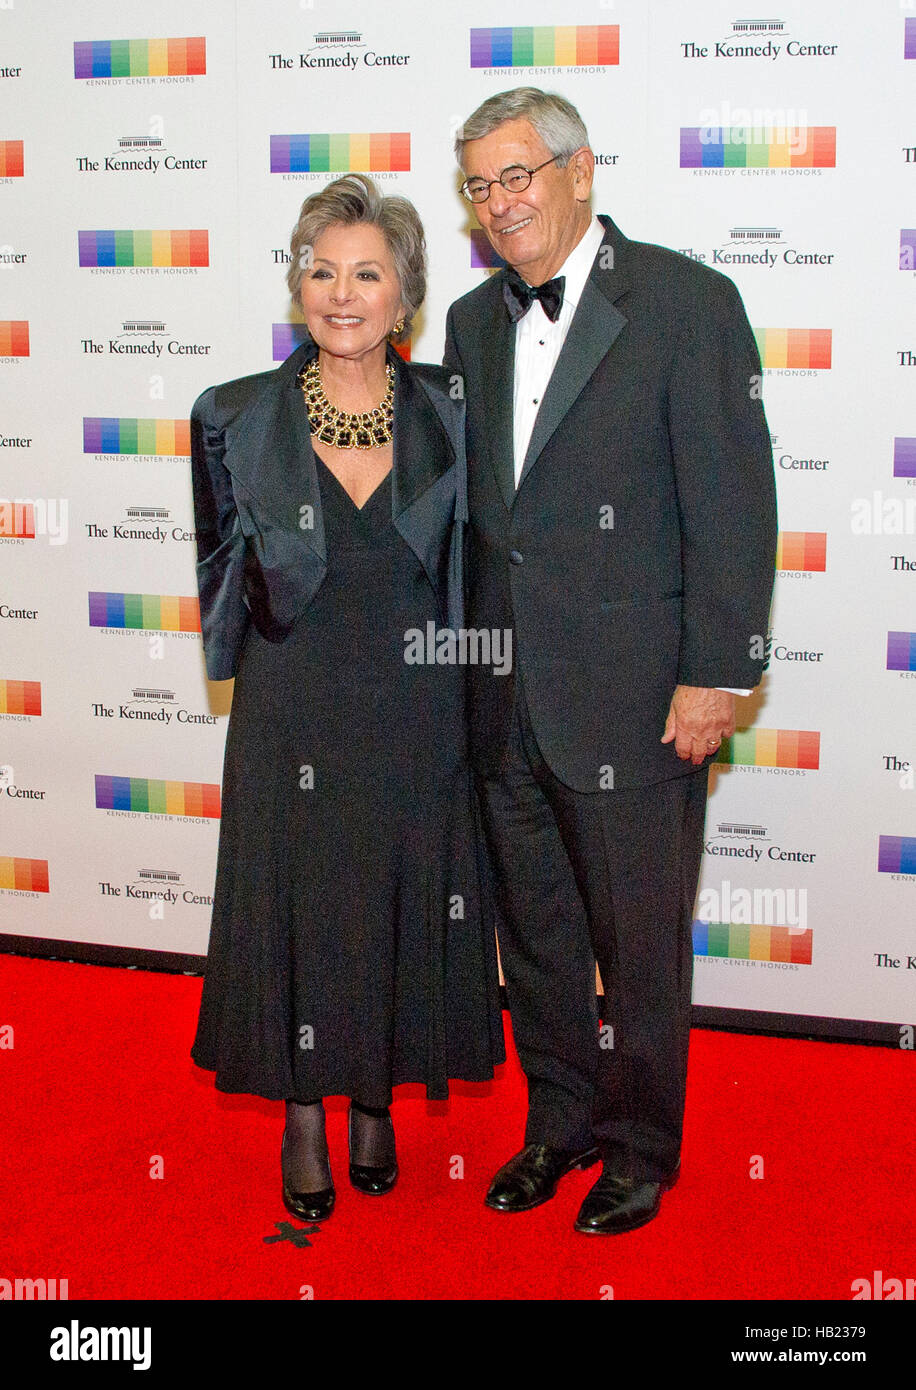 United States Senator Barbara Boxer (Democrat of California) and her husband, Stewart, arrive for the formal Artist's Dinner honoring the recipients of the 39th Annual Kennedy Center Honors hosted by United States Secretary of State John F. Kerry at the U.S. Department of State in Washington, DC on Saturday, December 3, 2016. The 2016 honorees are: Argentine pianist Martha Argerich; rock band the Eagles; screen and stage actor Al Pacino; gospel and blues singer Mavis Staples; and musician James Taylor. Credit: Ron Sachs/Pool via CNP - NO WIRE SERVICE - Photo: Ron Sachs/Consolidated/dpa Stock Photo